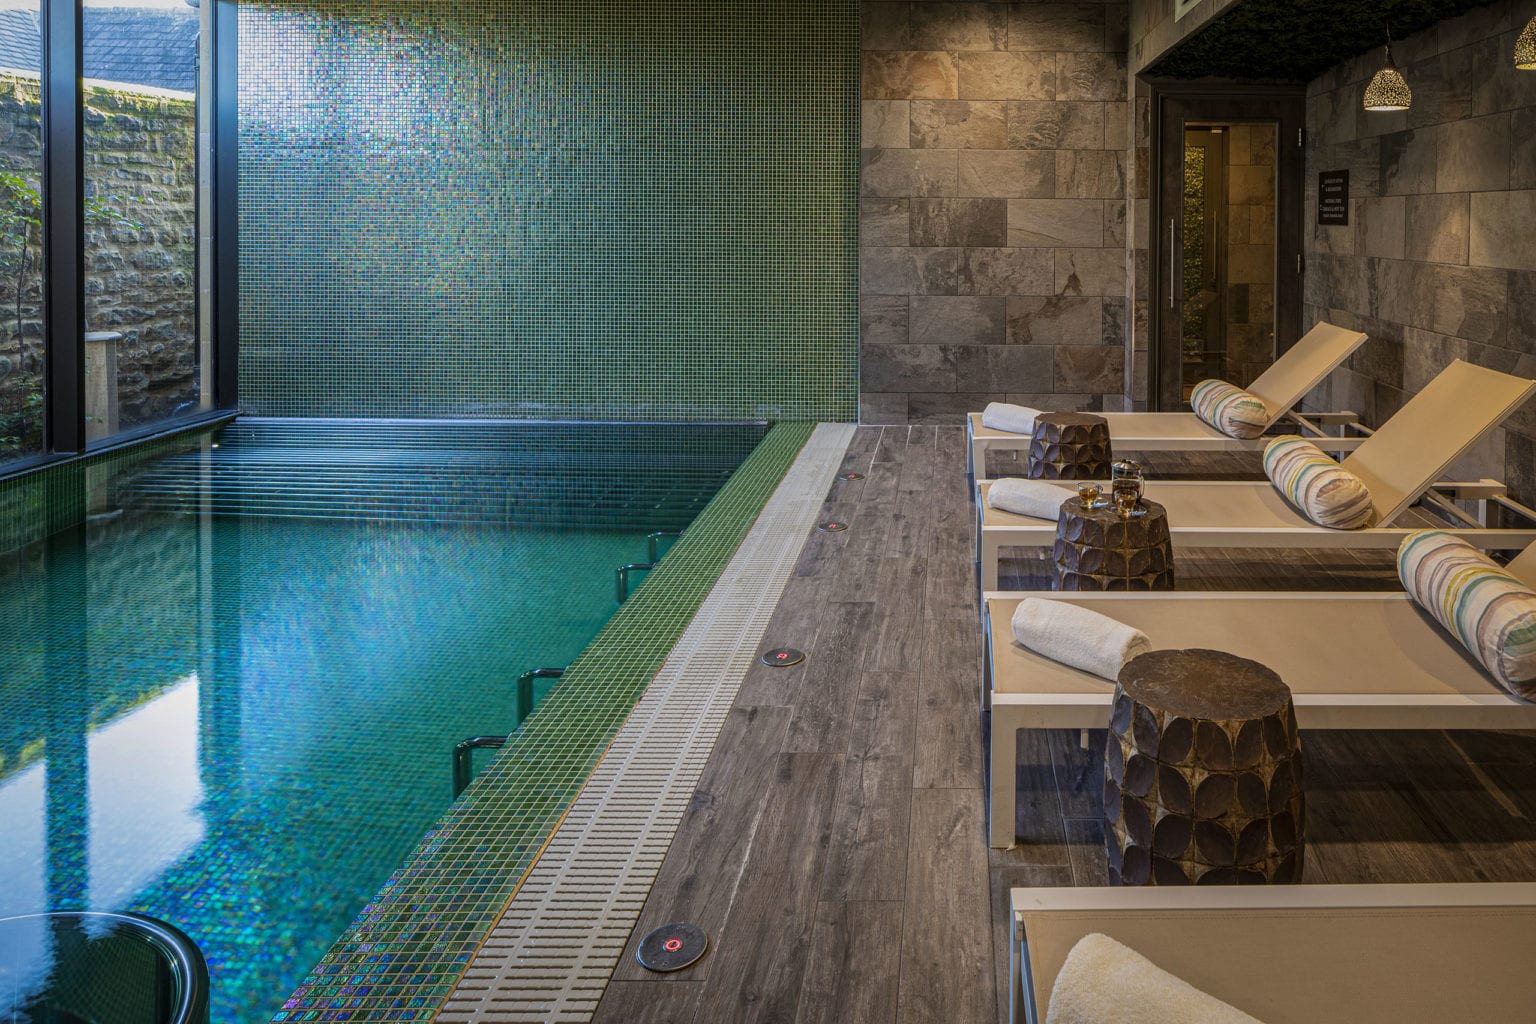 Hydrotherapy pool at the luxurious Swinton Country Club and Spa near Harrogate and Ripon in North Yorkshire